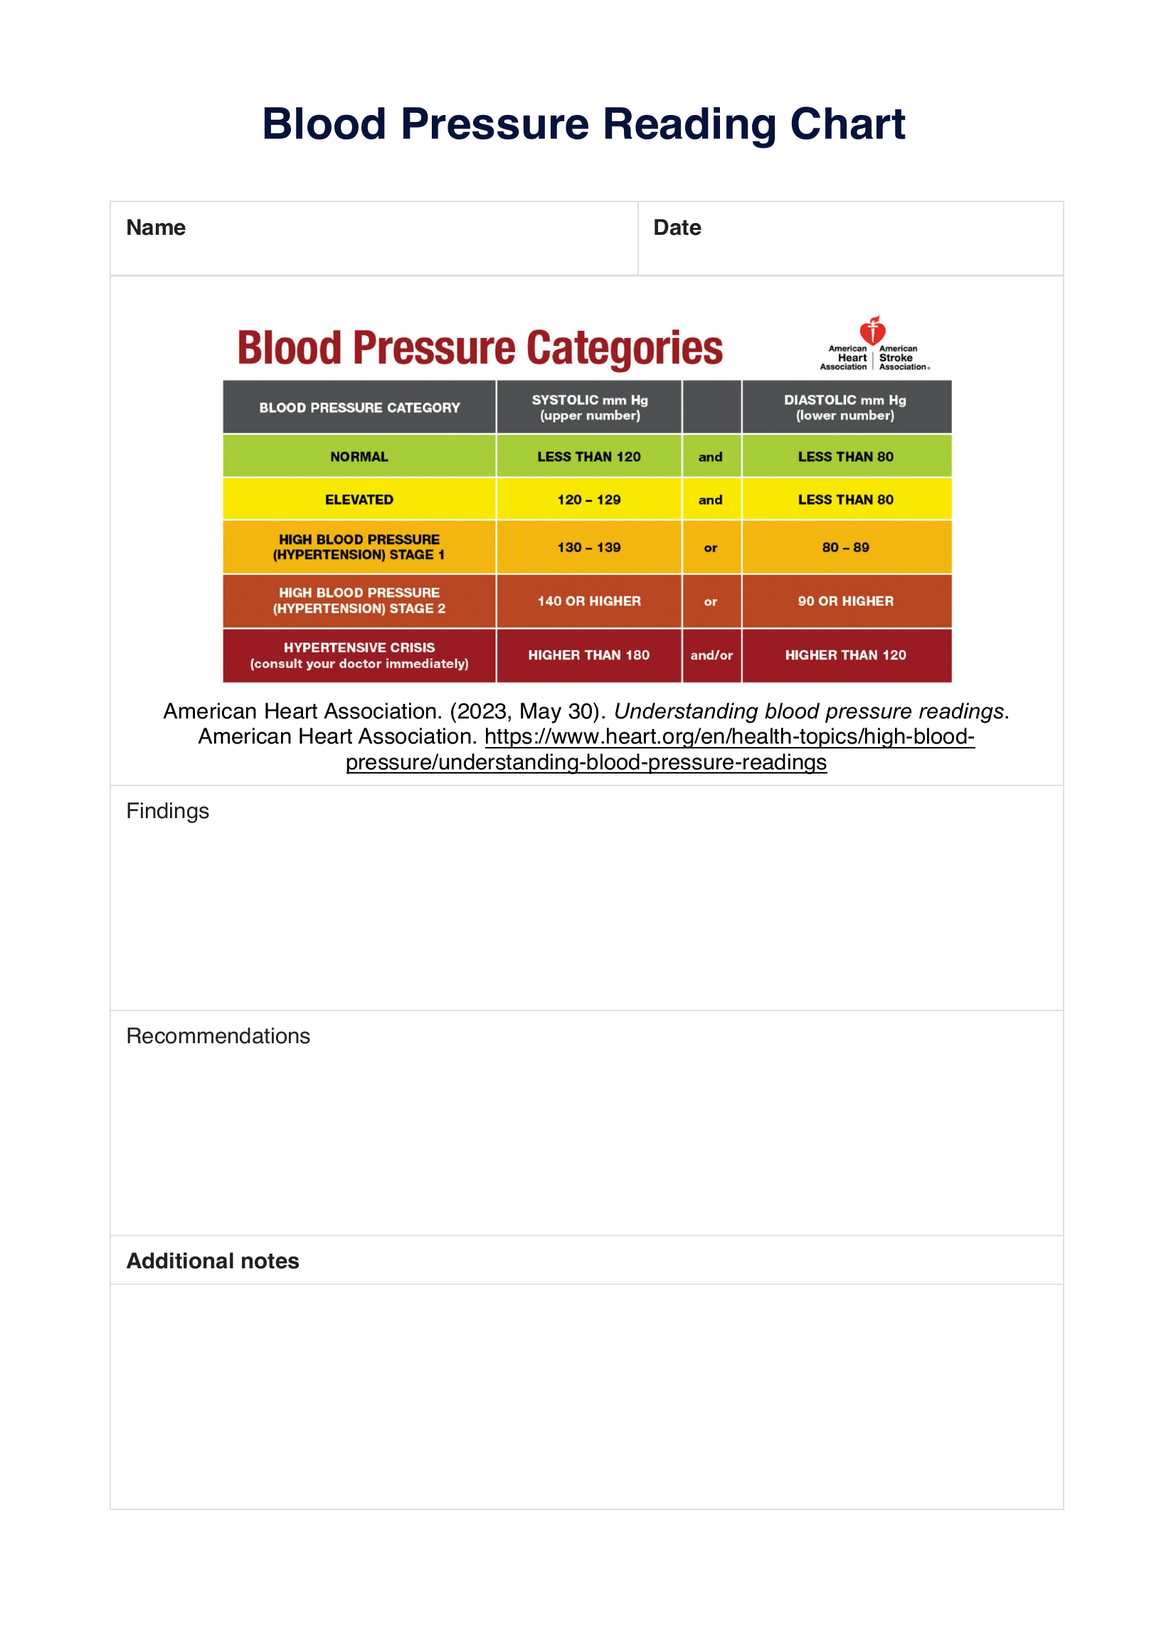 Blood Pressure Reading Chart PDF Example